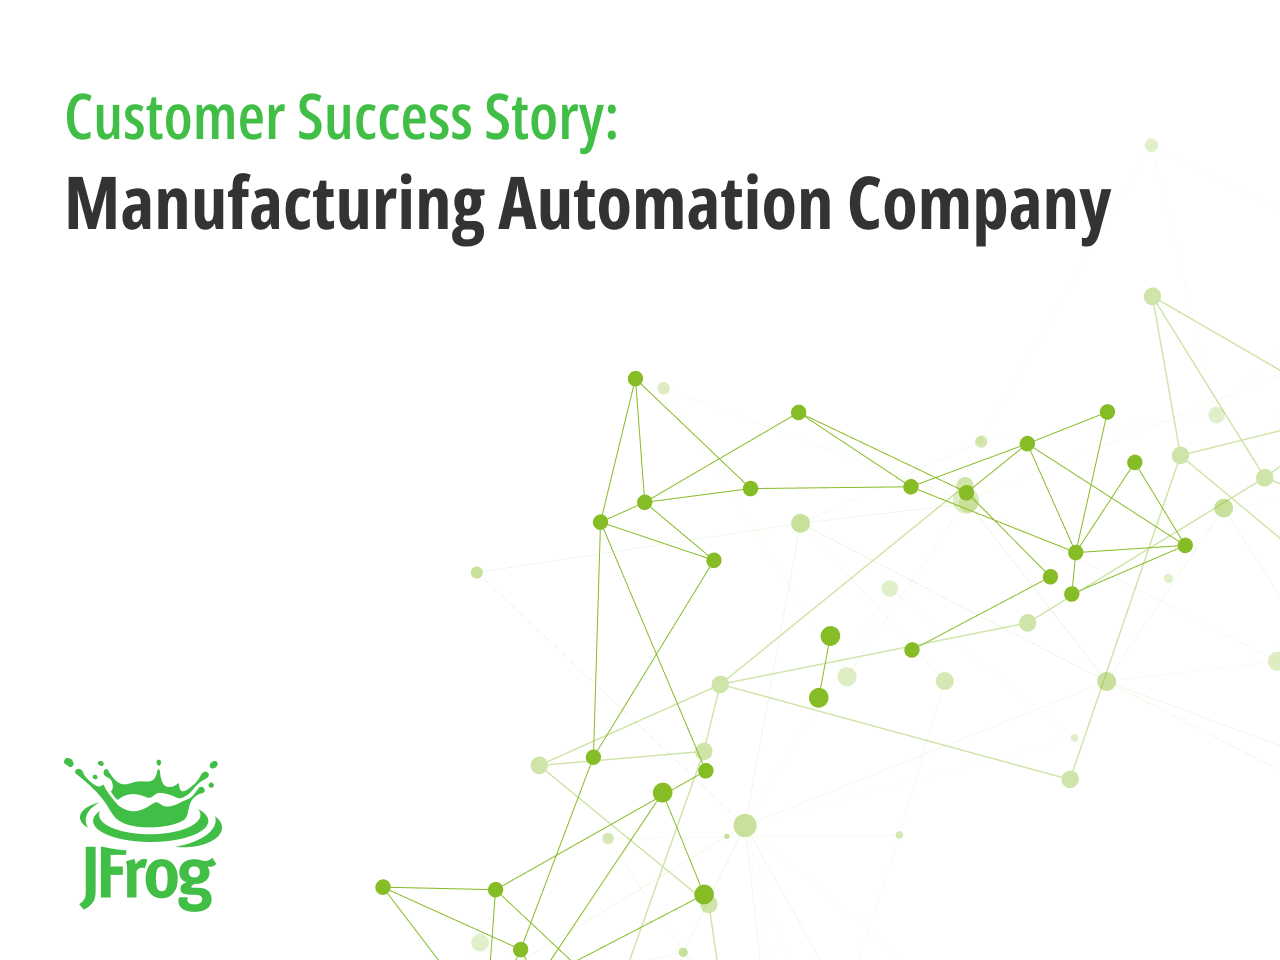 Customer Success Story: Manufacturing Automation